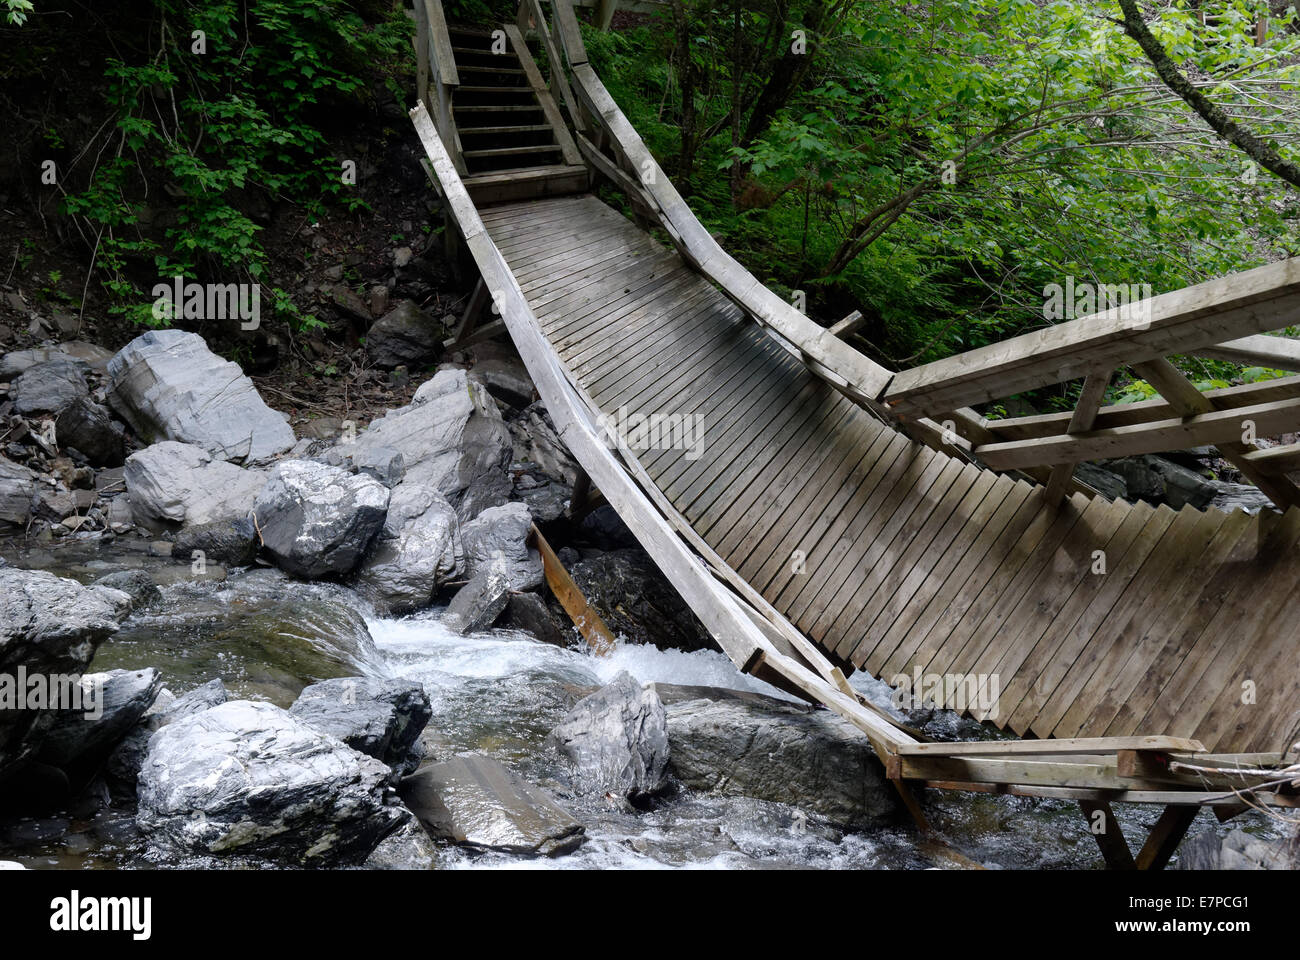 A wooden bridge destroyed by floodwater in the river, Gaspesie, Quebec, Canada Stock Photo